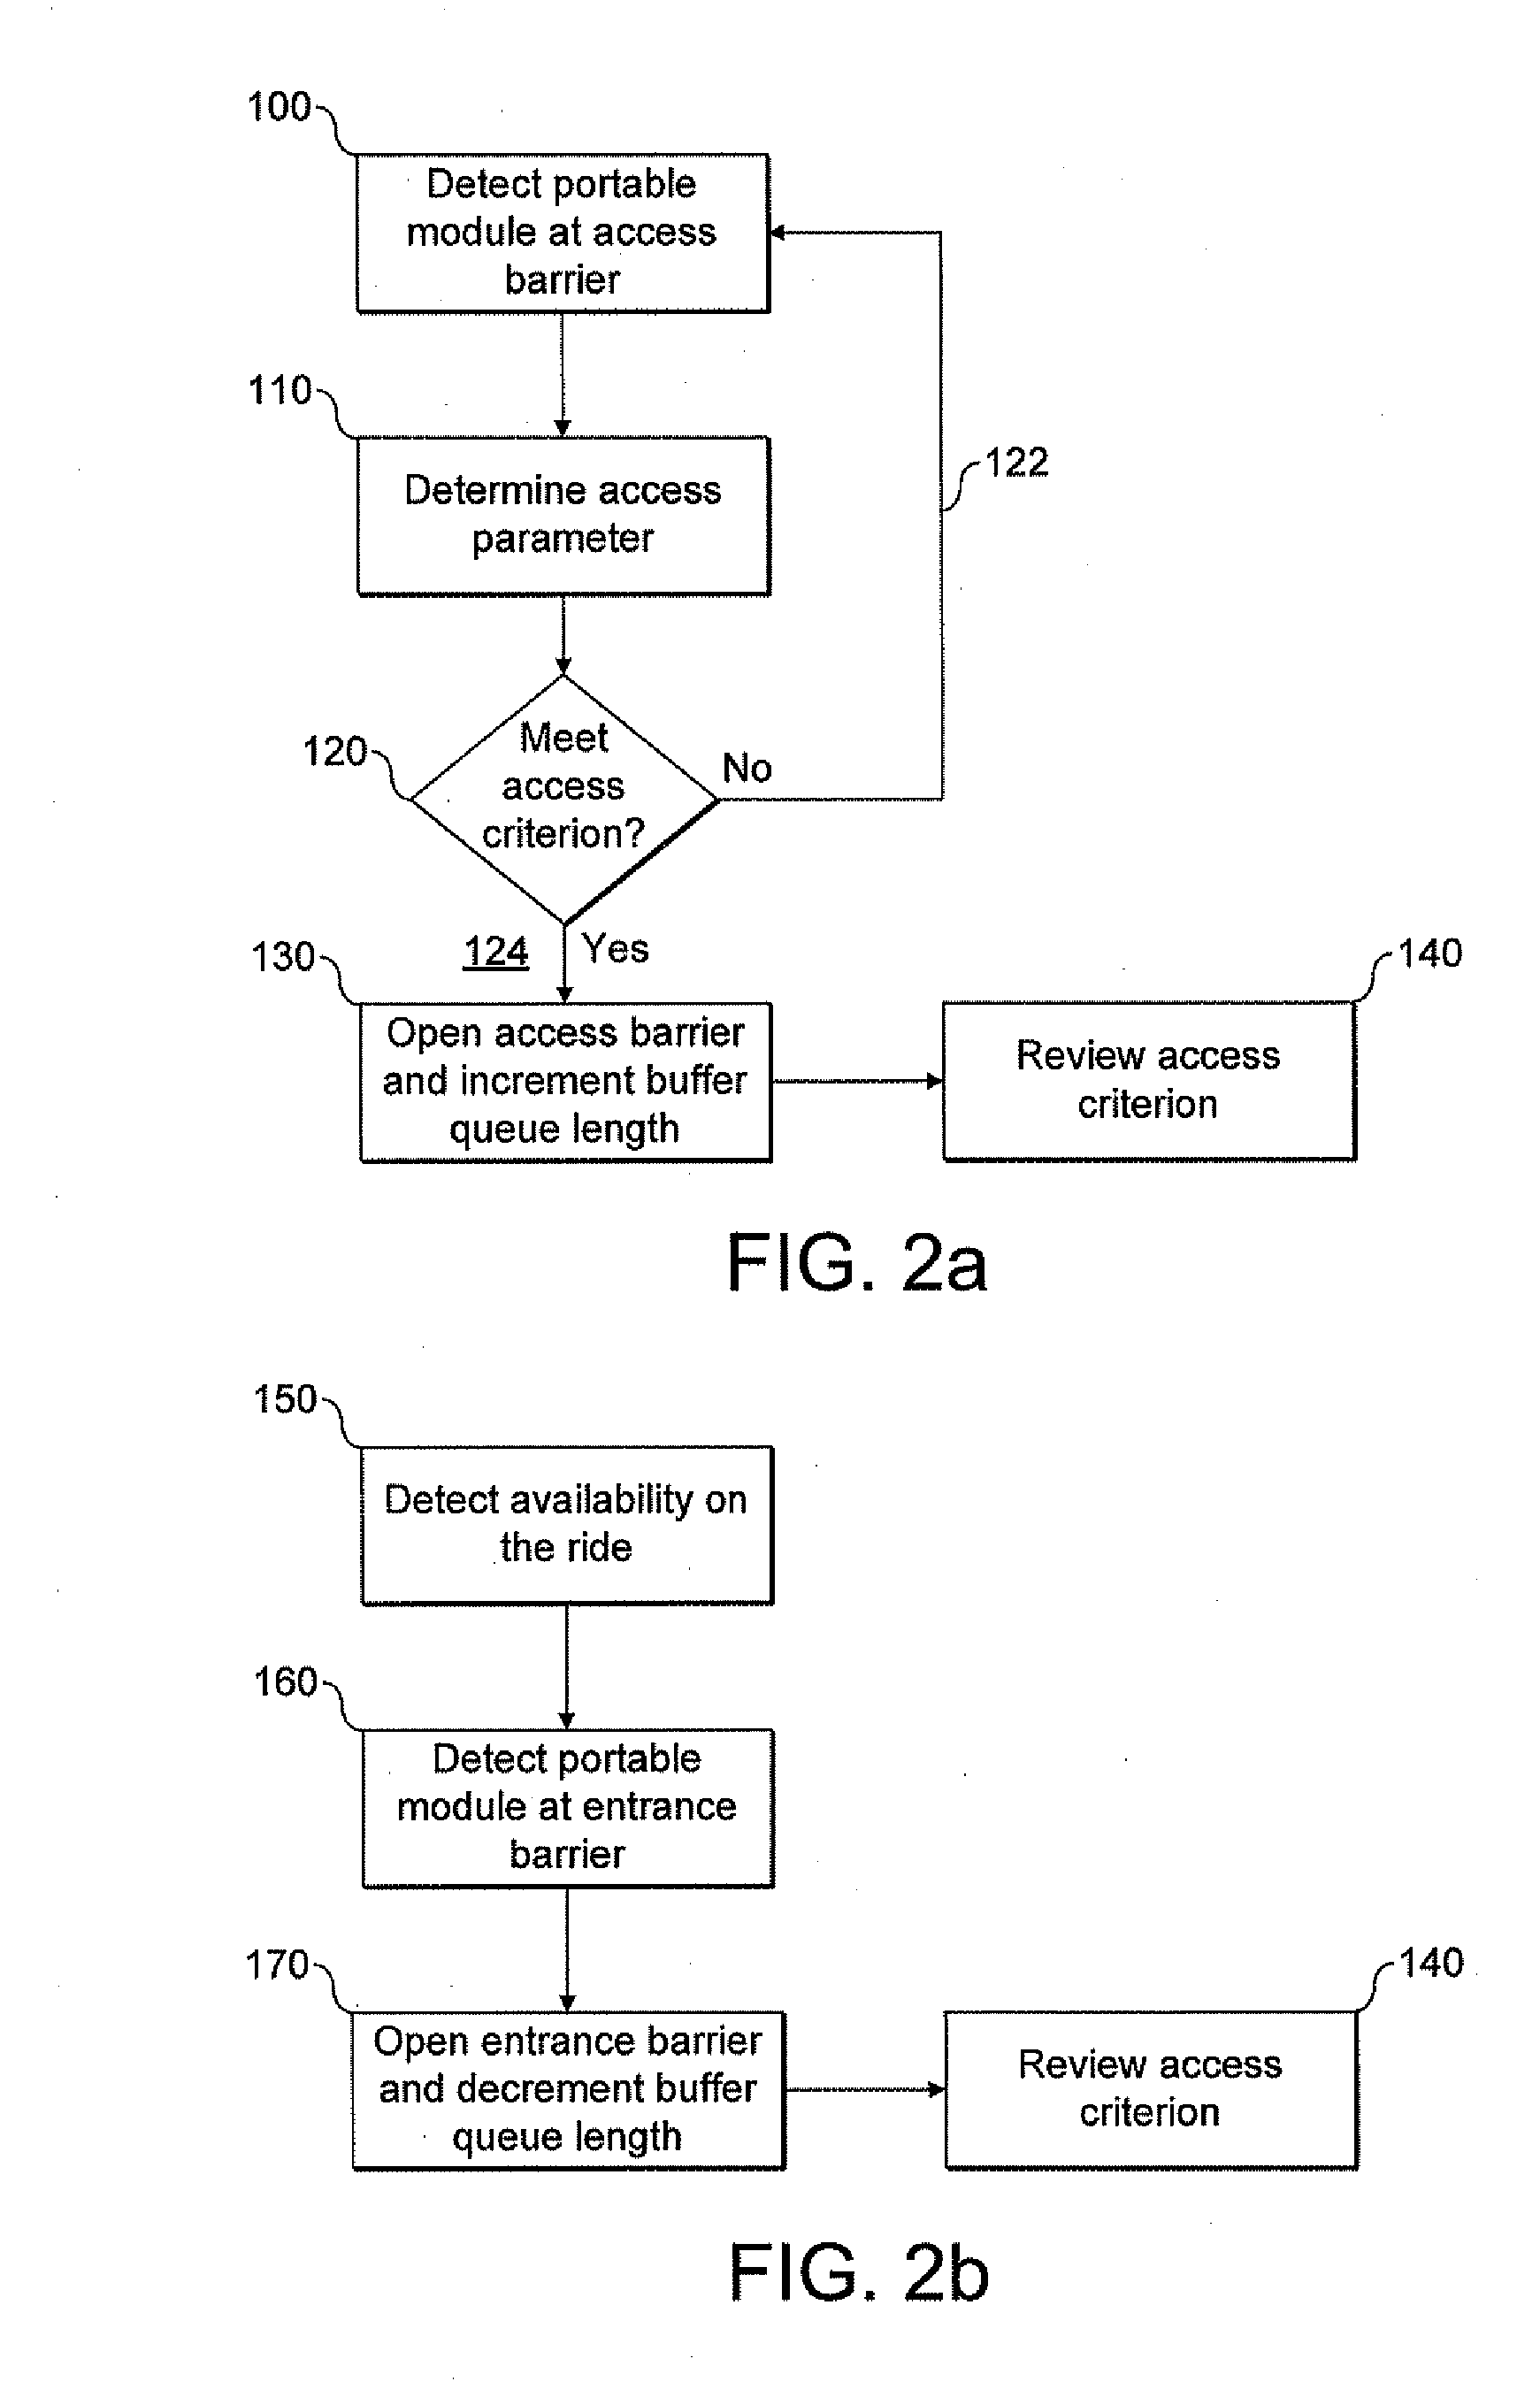 System for regulating access to a resource